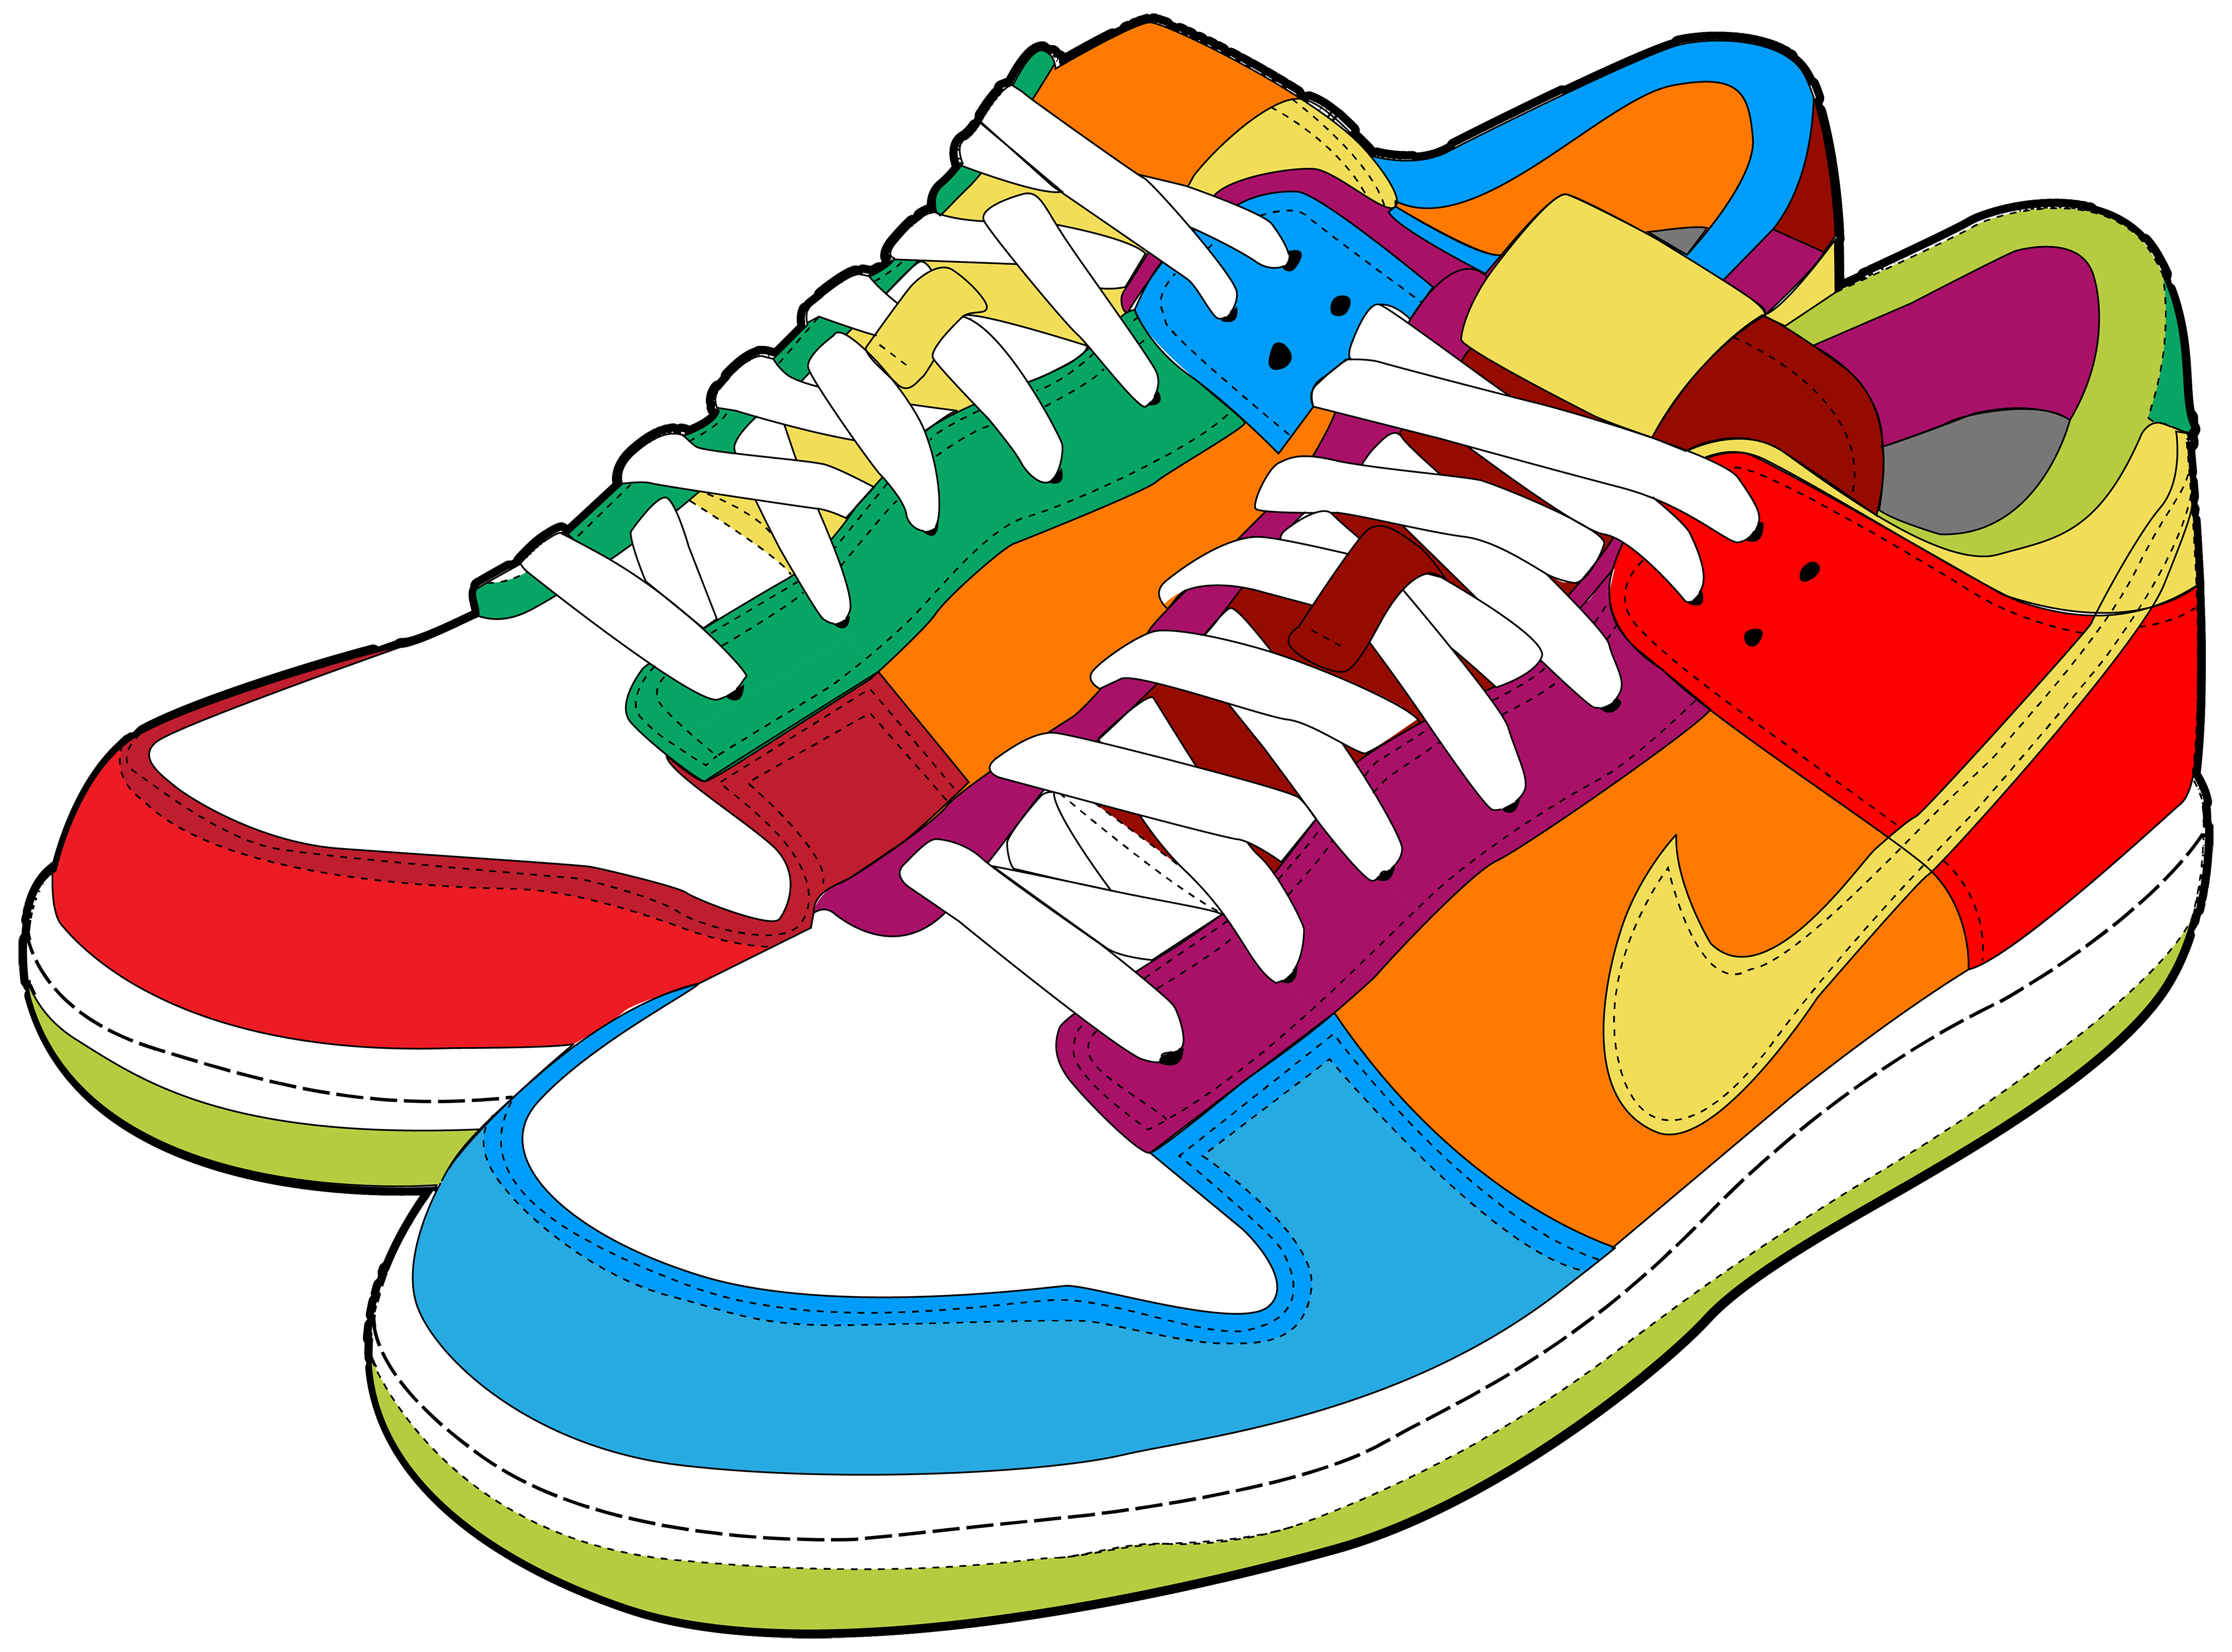 Golfing clipart golf shoe. Colorful sneakers png shoes